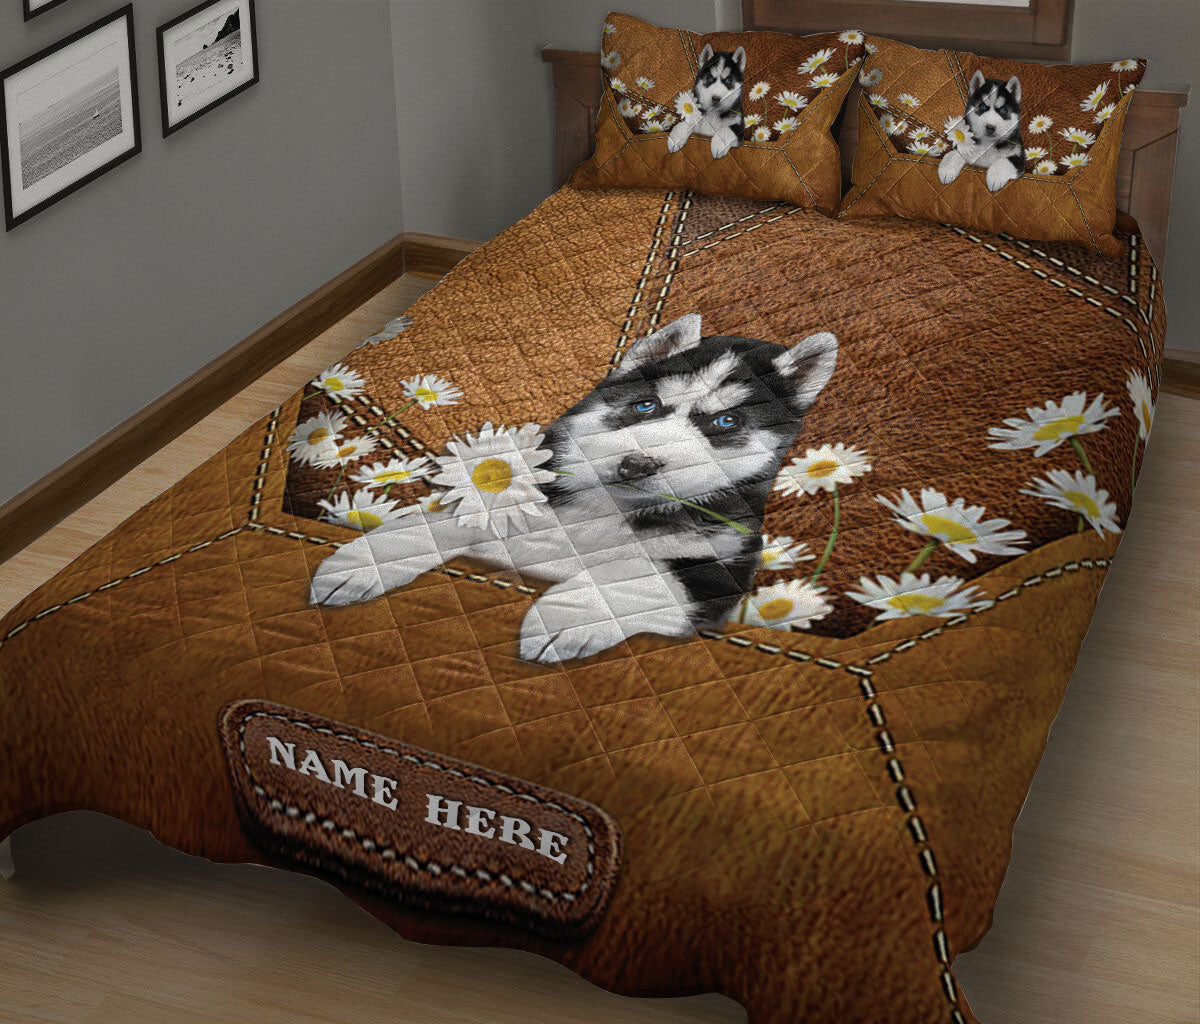 Ohaprints-Quilt-Bed-Set-Pillowcase-Siberian-Husky-Puppies-Dog-Daisy-Floer-Custom-Personalized-Name-Blanket-Bedspread-Bedding-1454-King (90'' x 100'')